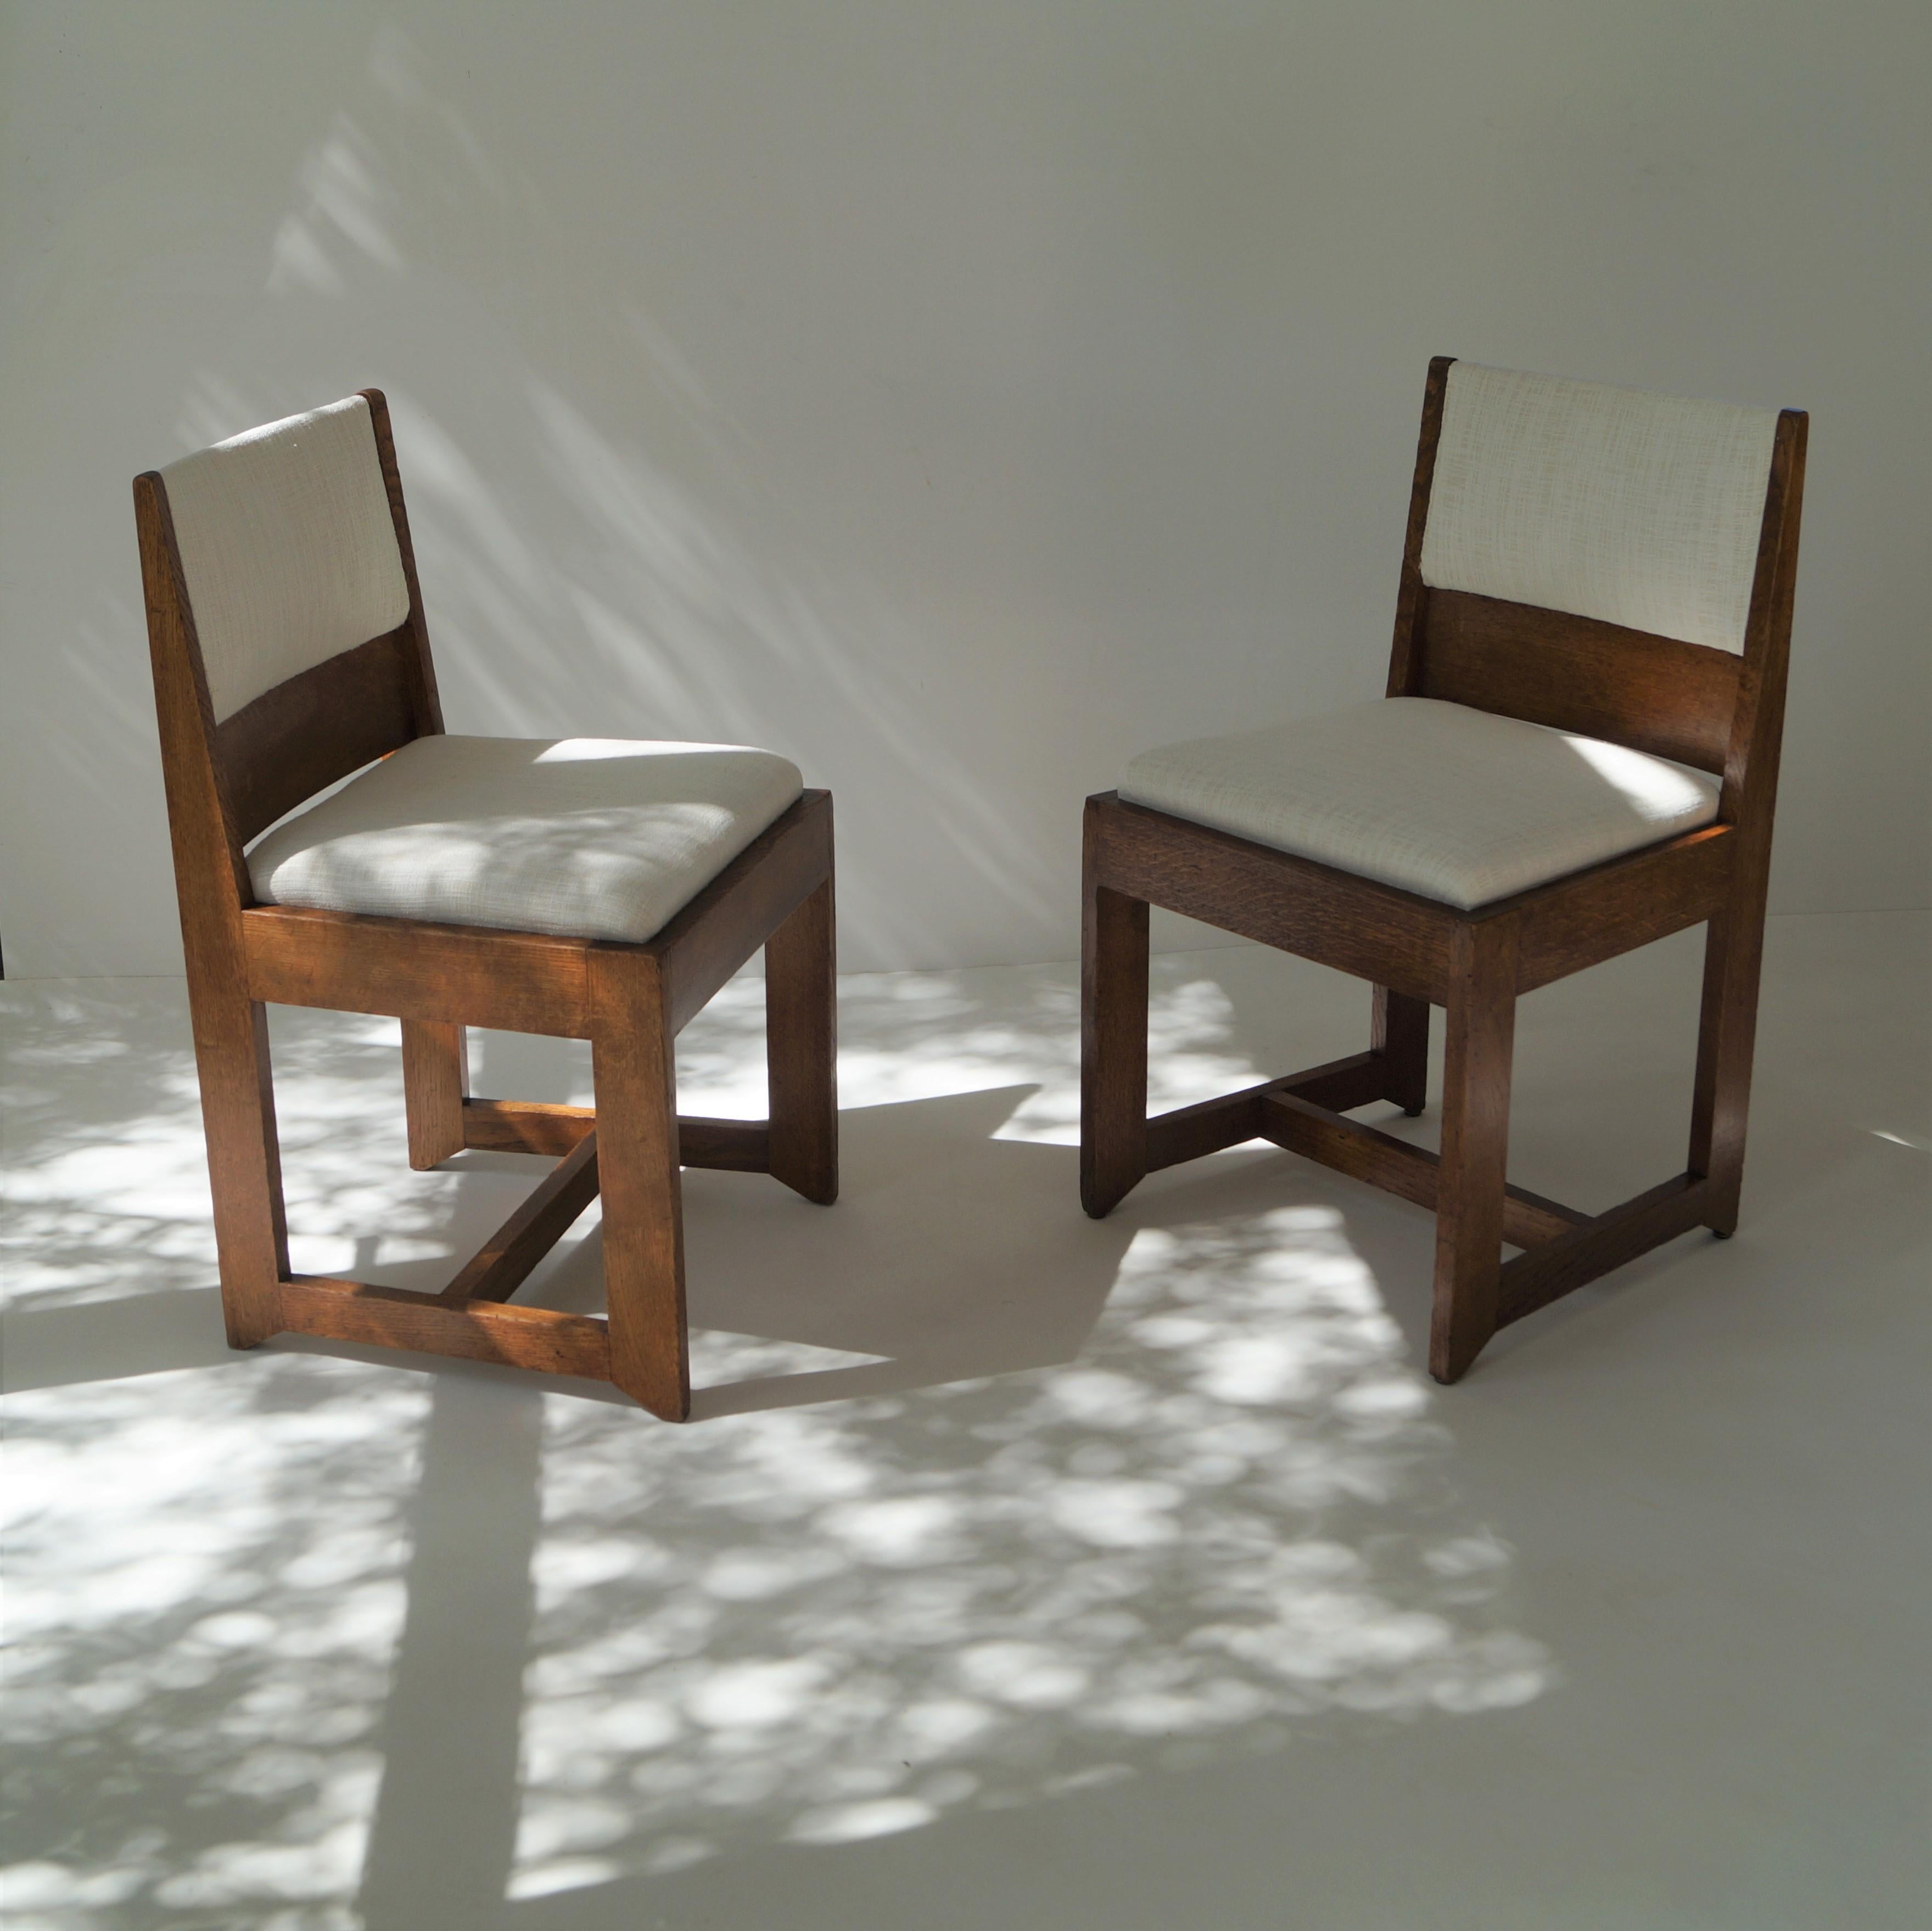 Dutch Art Deco Modernist set of chairs by H. Wouda for Pander, 1924 In Good Condition For Sale In EVERDINGEN, NL